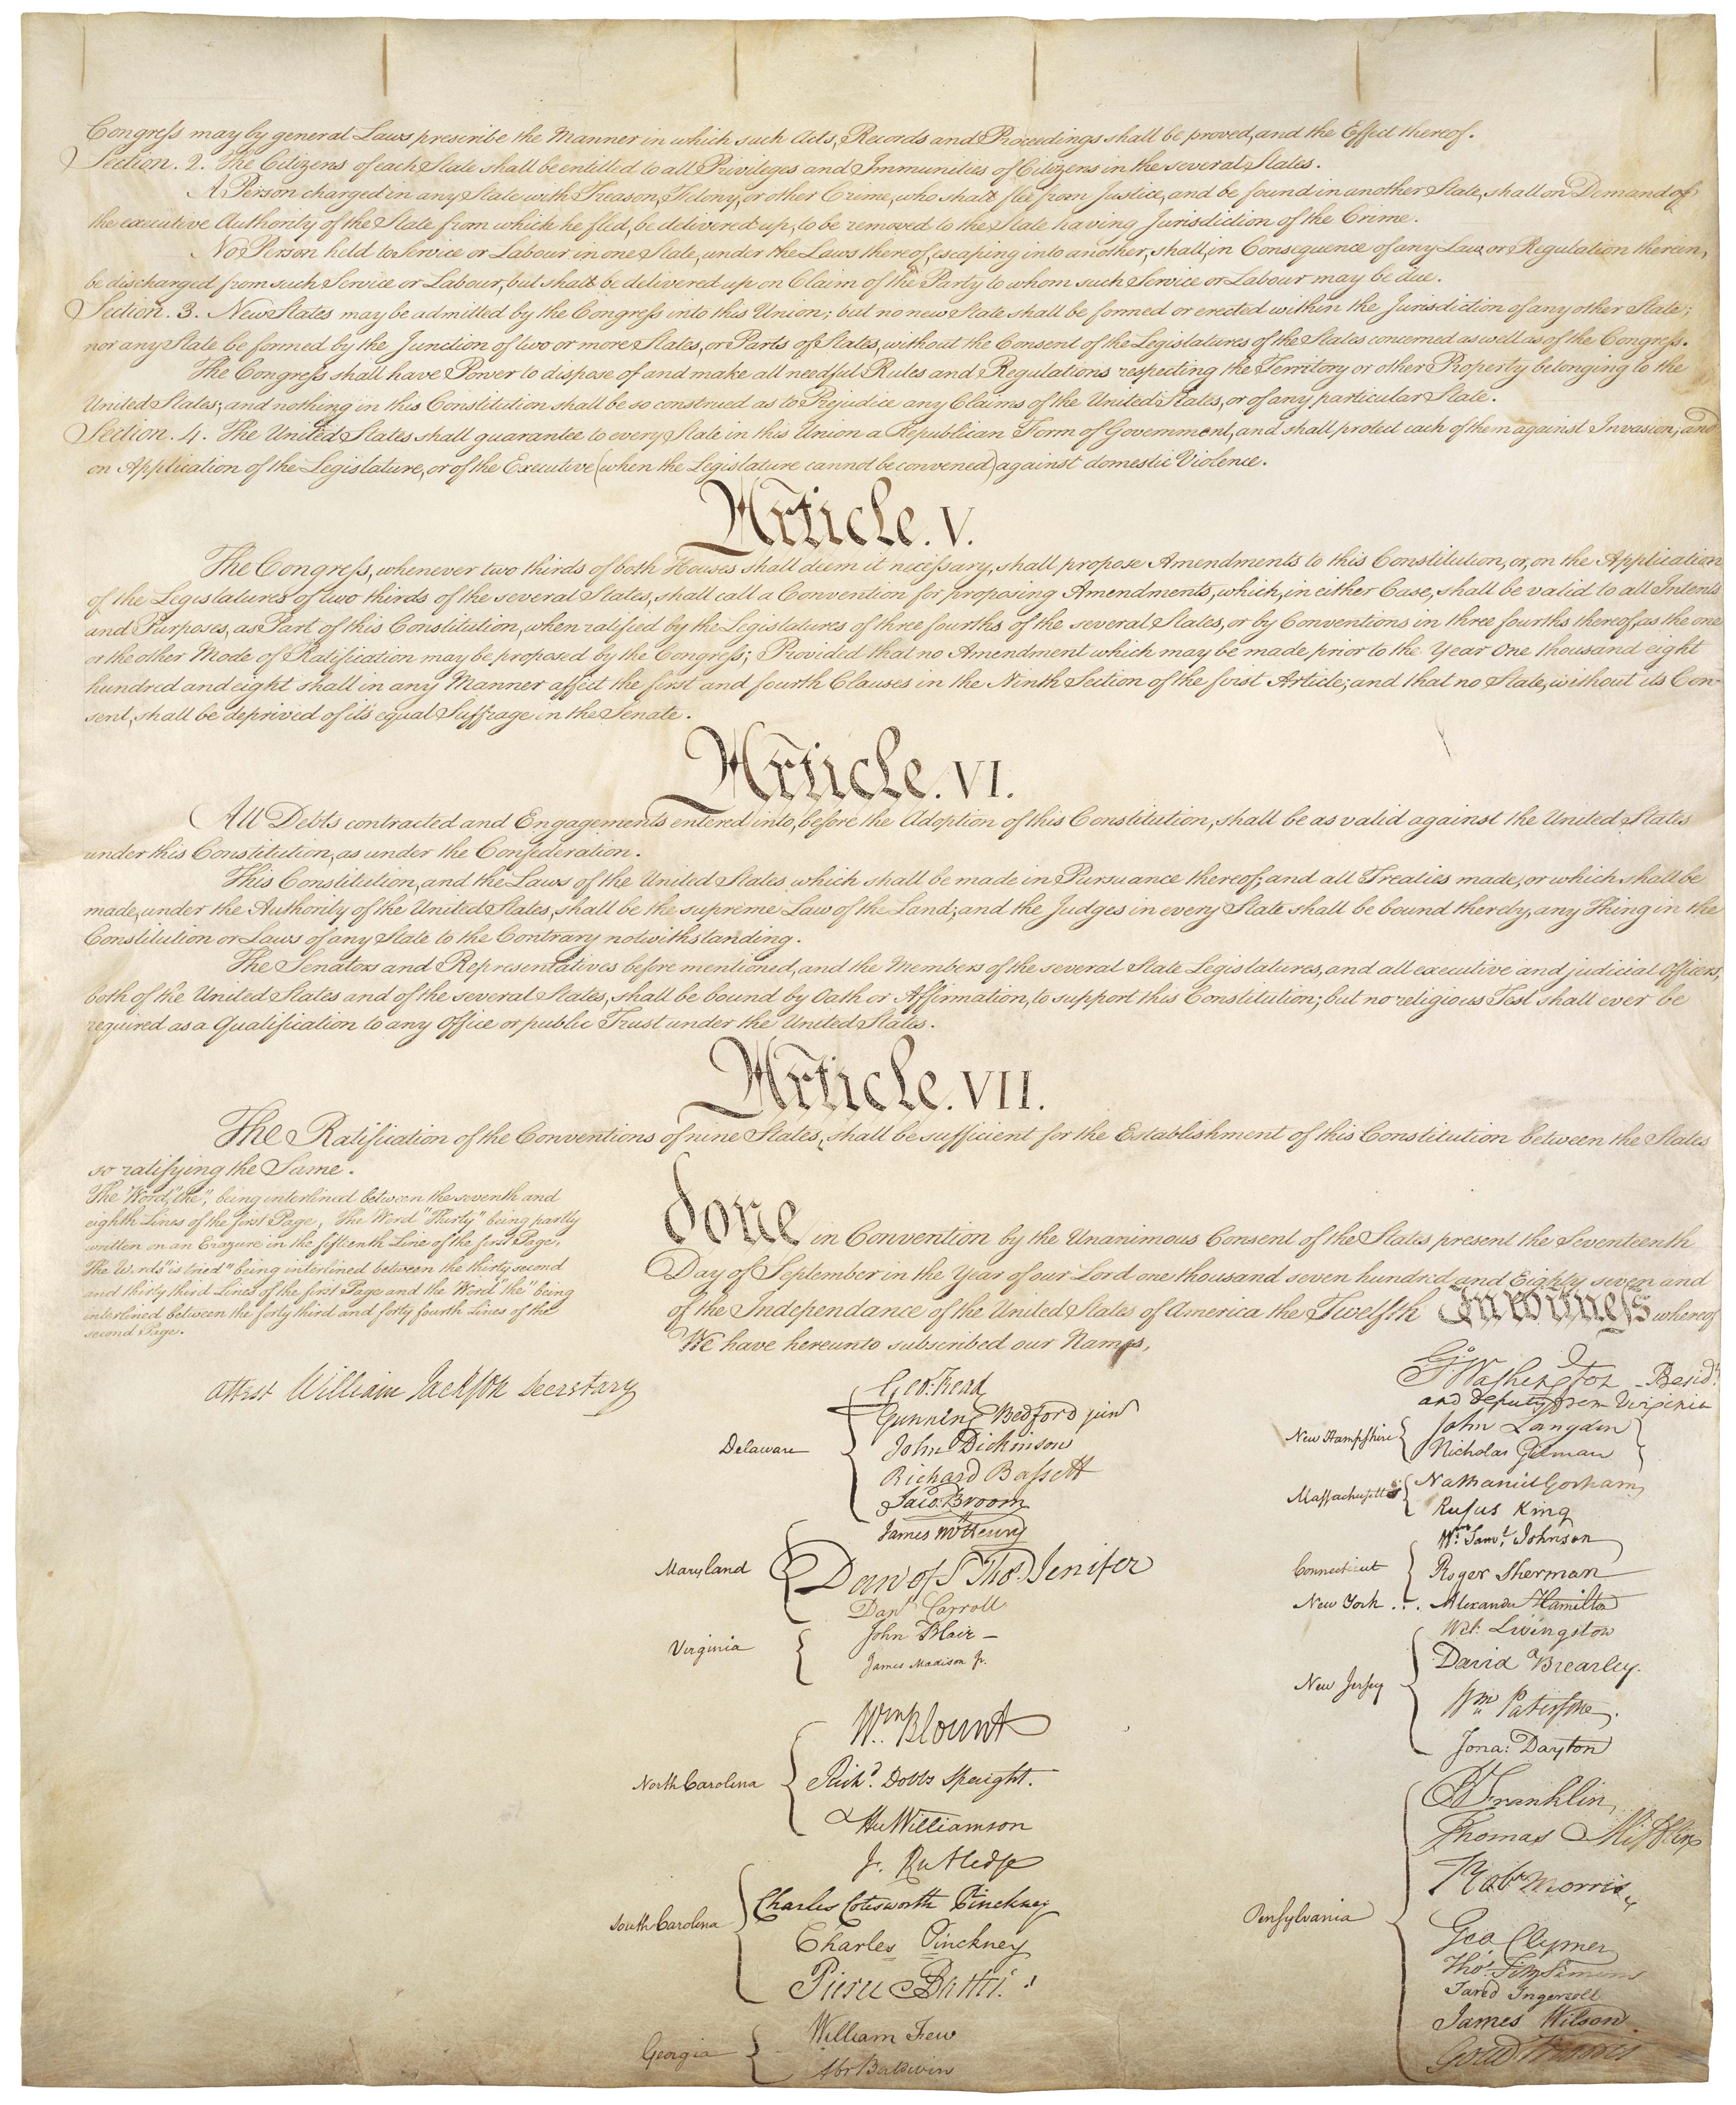 United States Constitution - Page 4 of 4